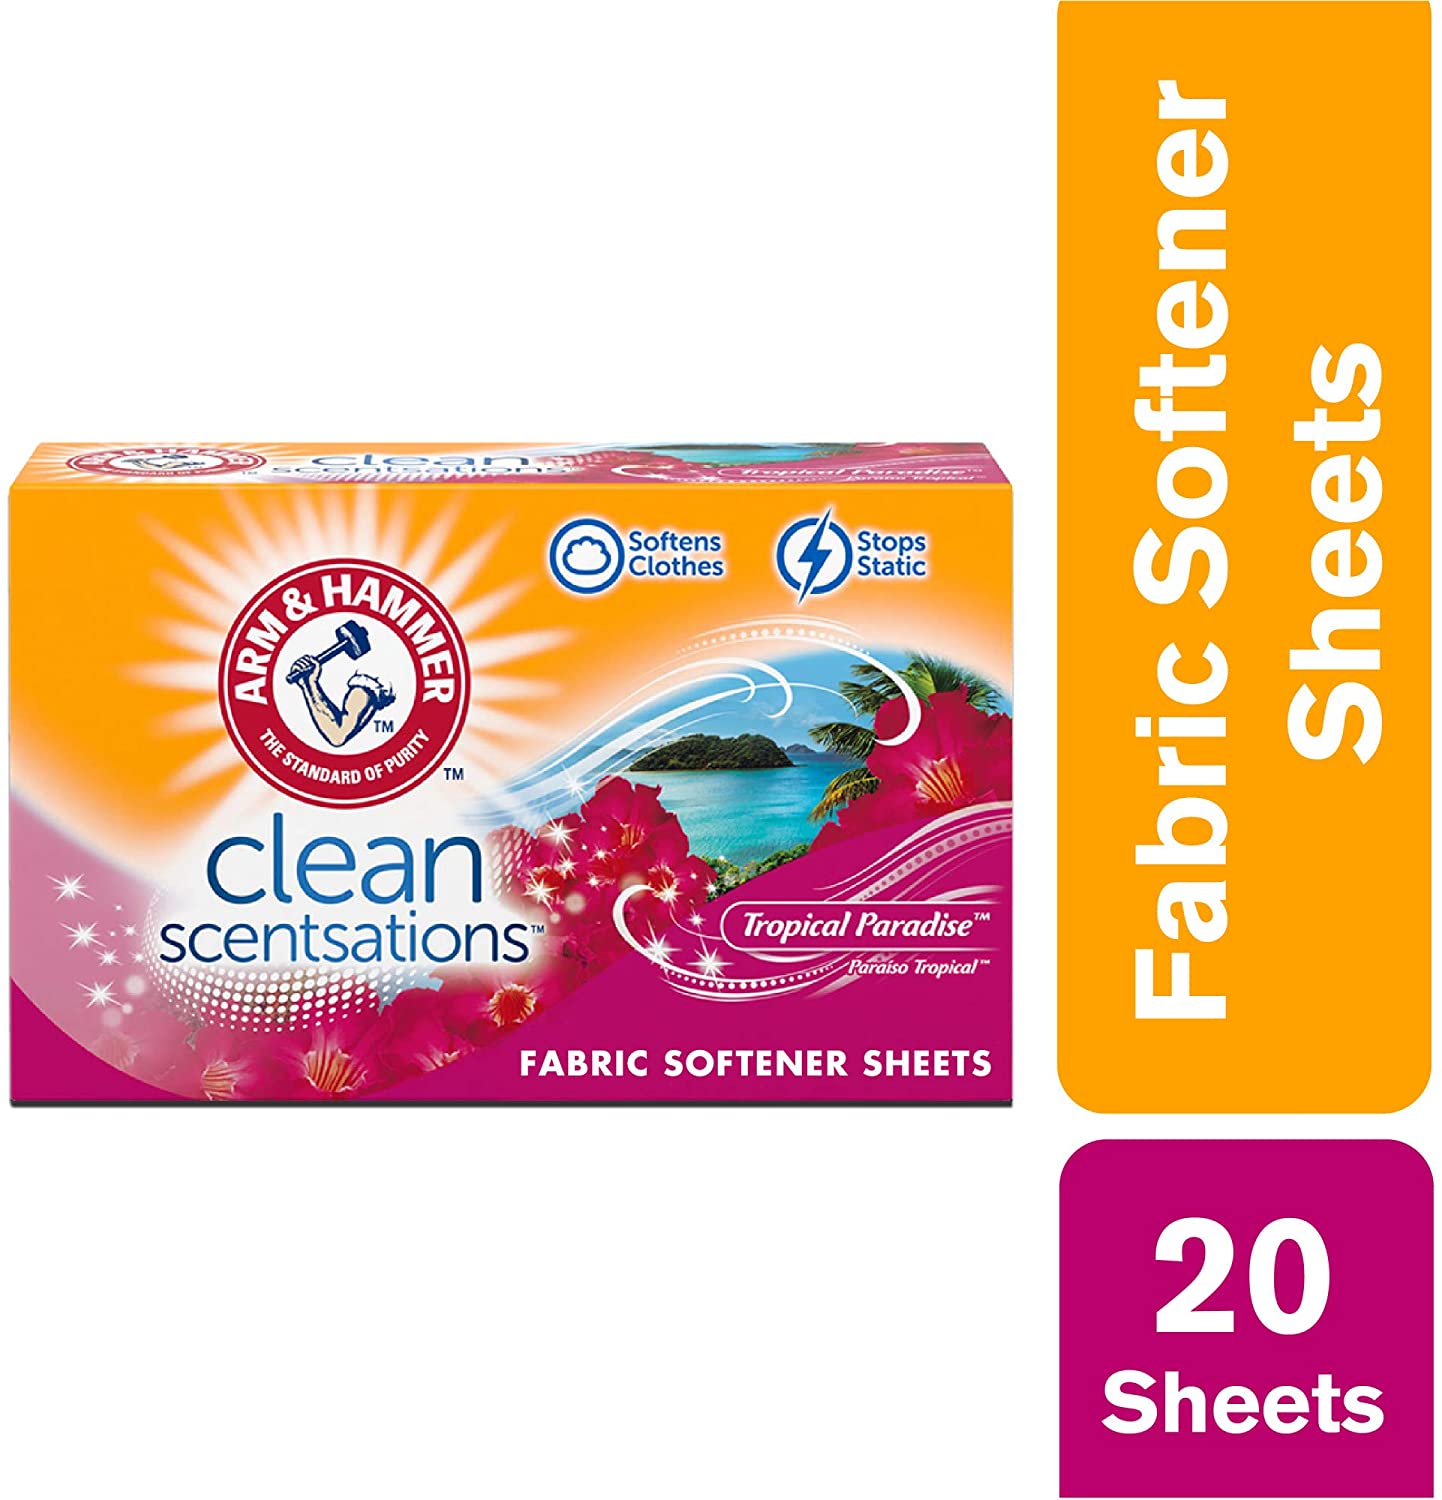 ARM & HAMMER Fabric Softener Sheets, 20 sheets, Tropical Paradise (Pack of 3)